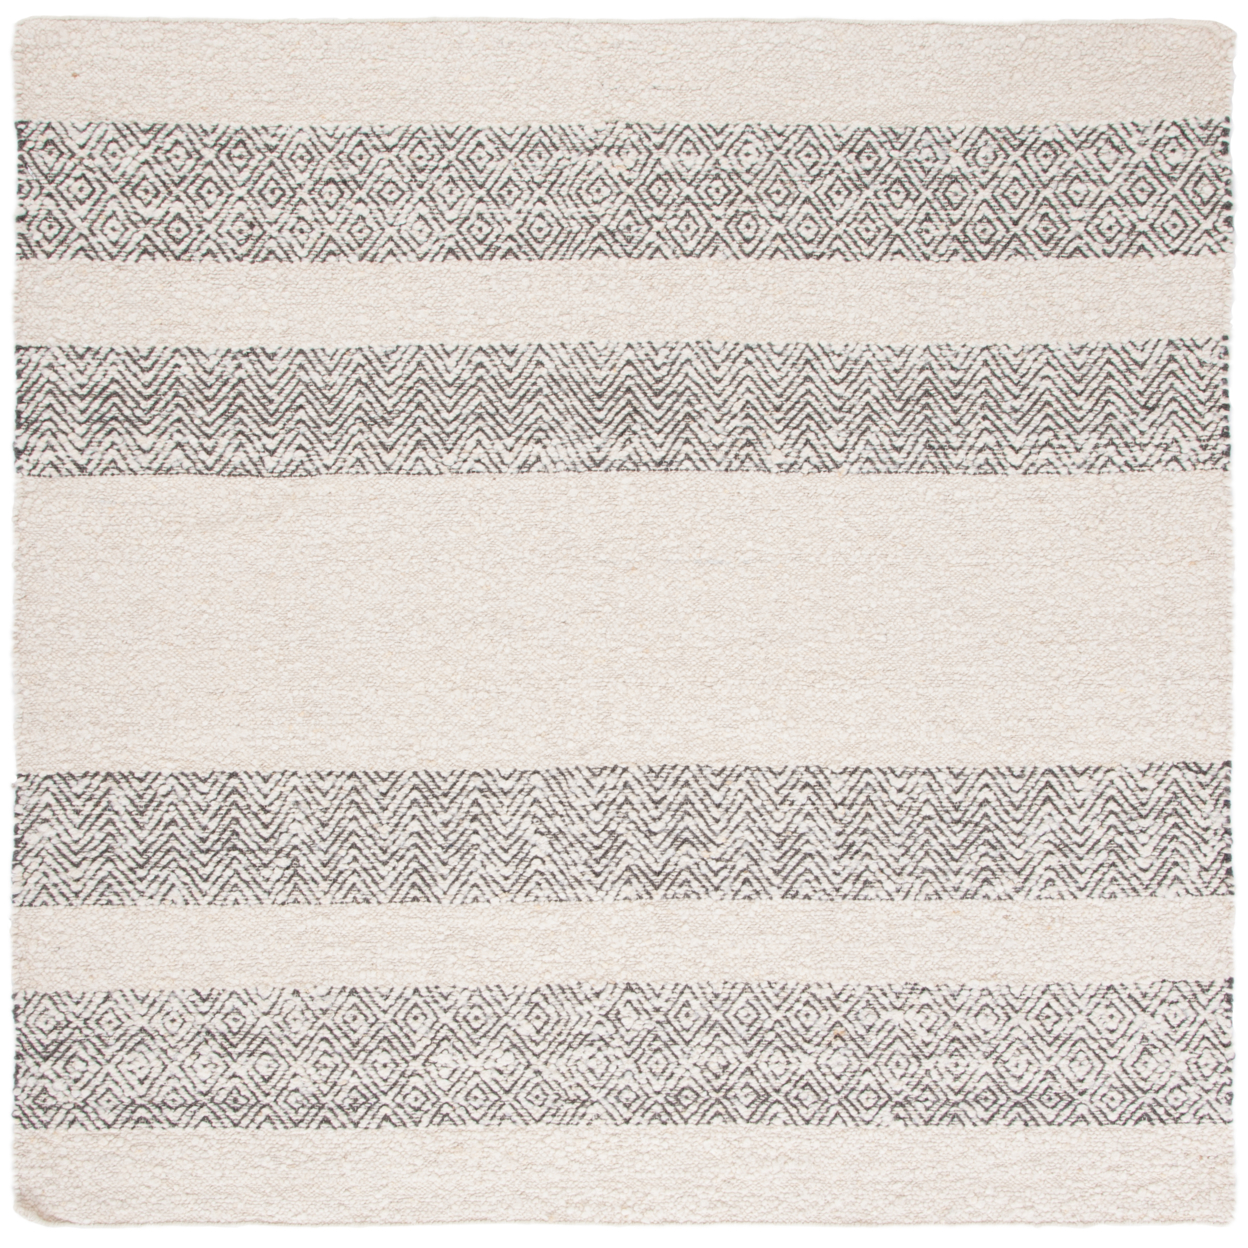 SAFAVIEH Natura Collection NAT332A Handwoven Ivory Rug - 6' Square